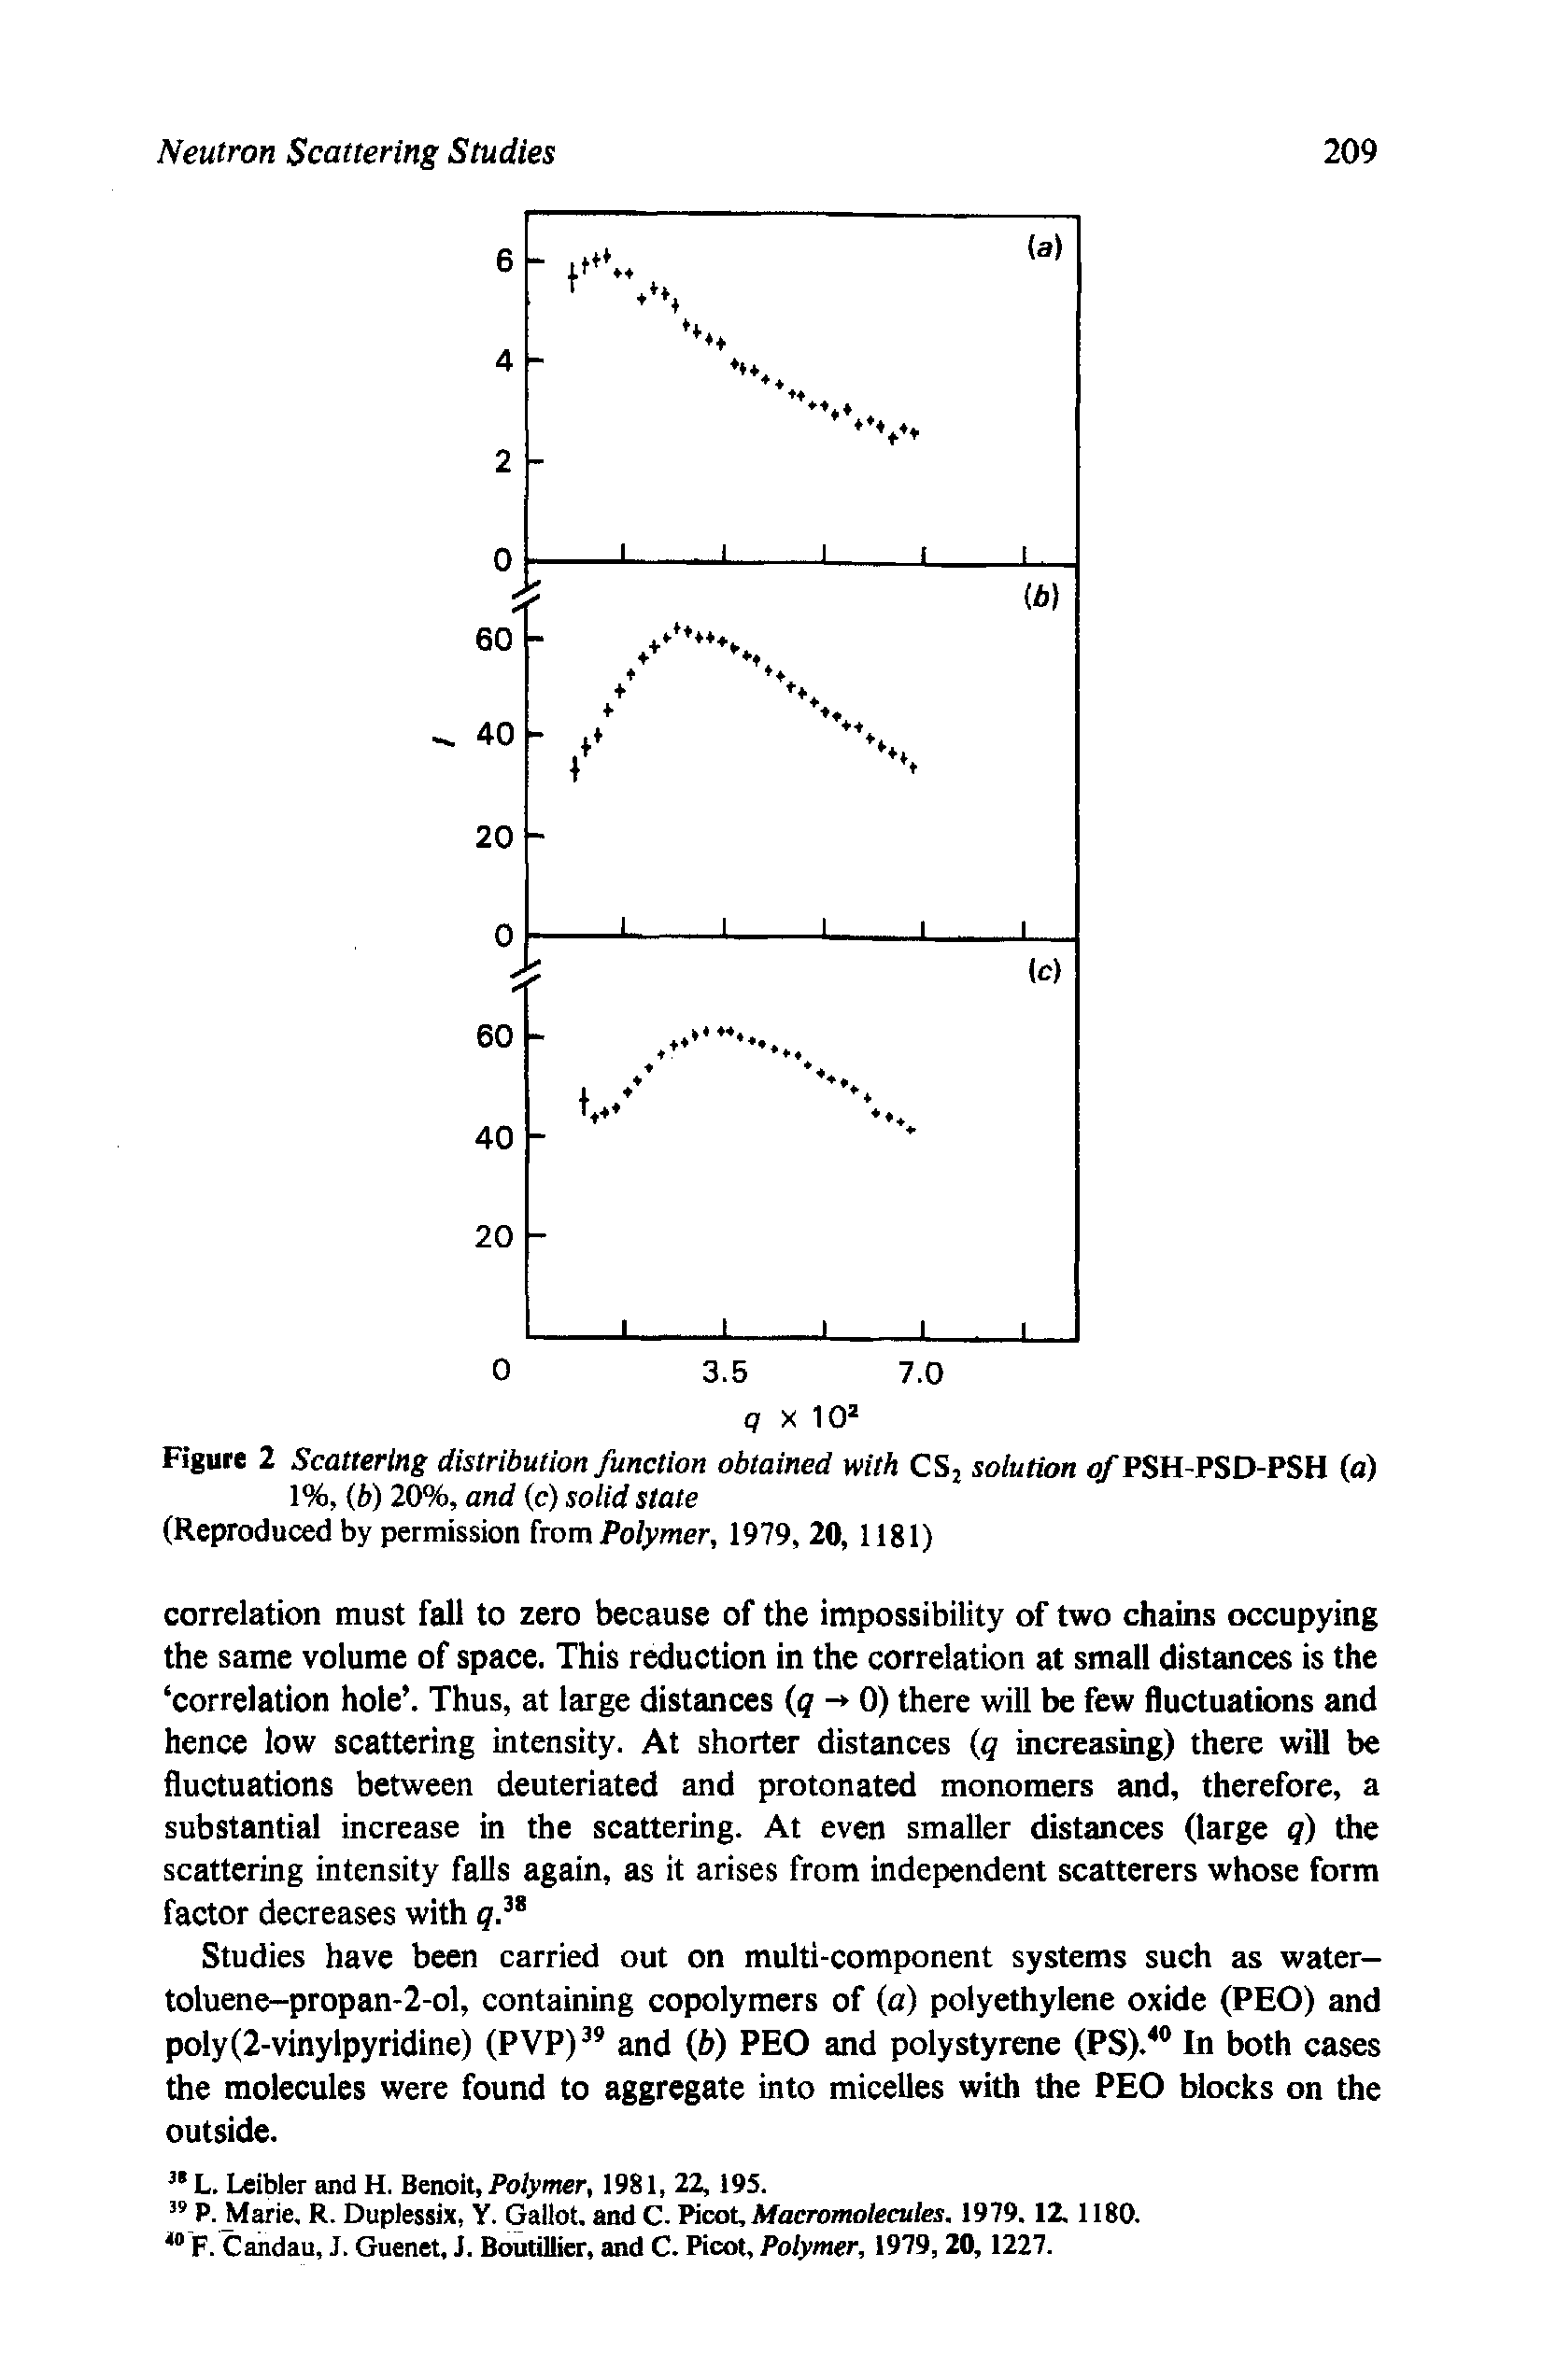 Figure 2 Scattering distribution function obtained with CSj solution (/PSH-PSO-PSH (a) 1%, (6) 20%, and (c) solid State (Reproduced by permission from Po/ymer, 1979, 20, 1181)...